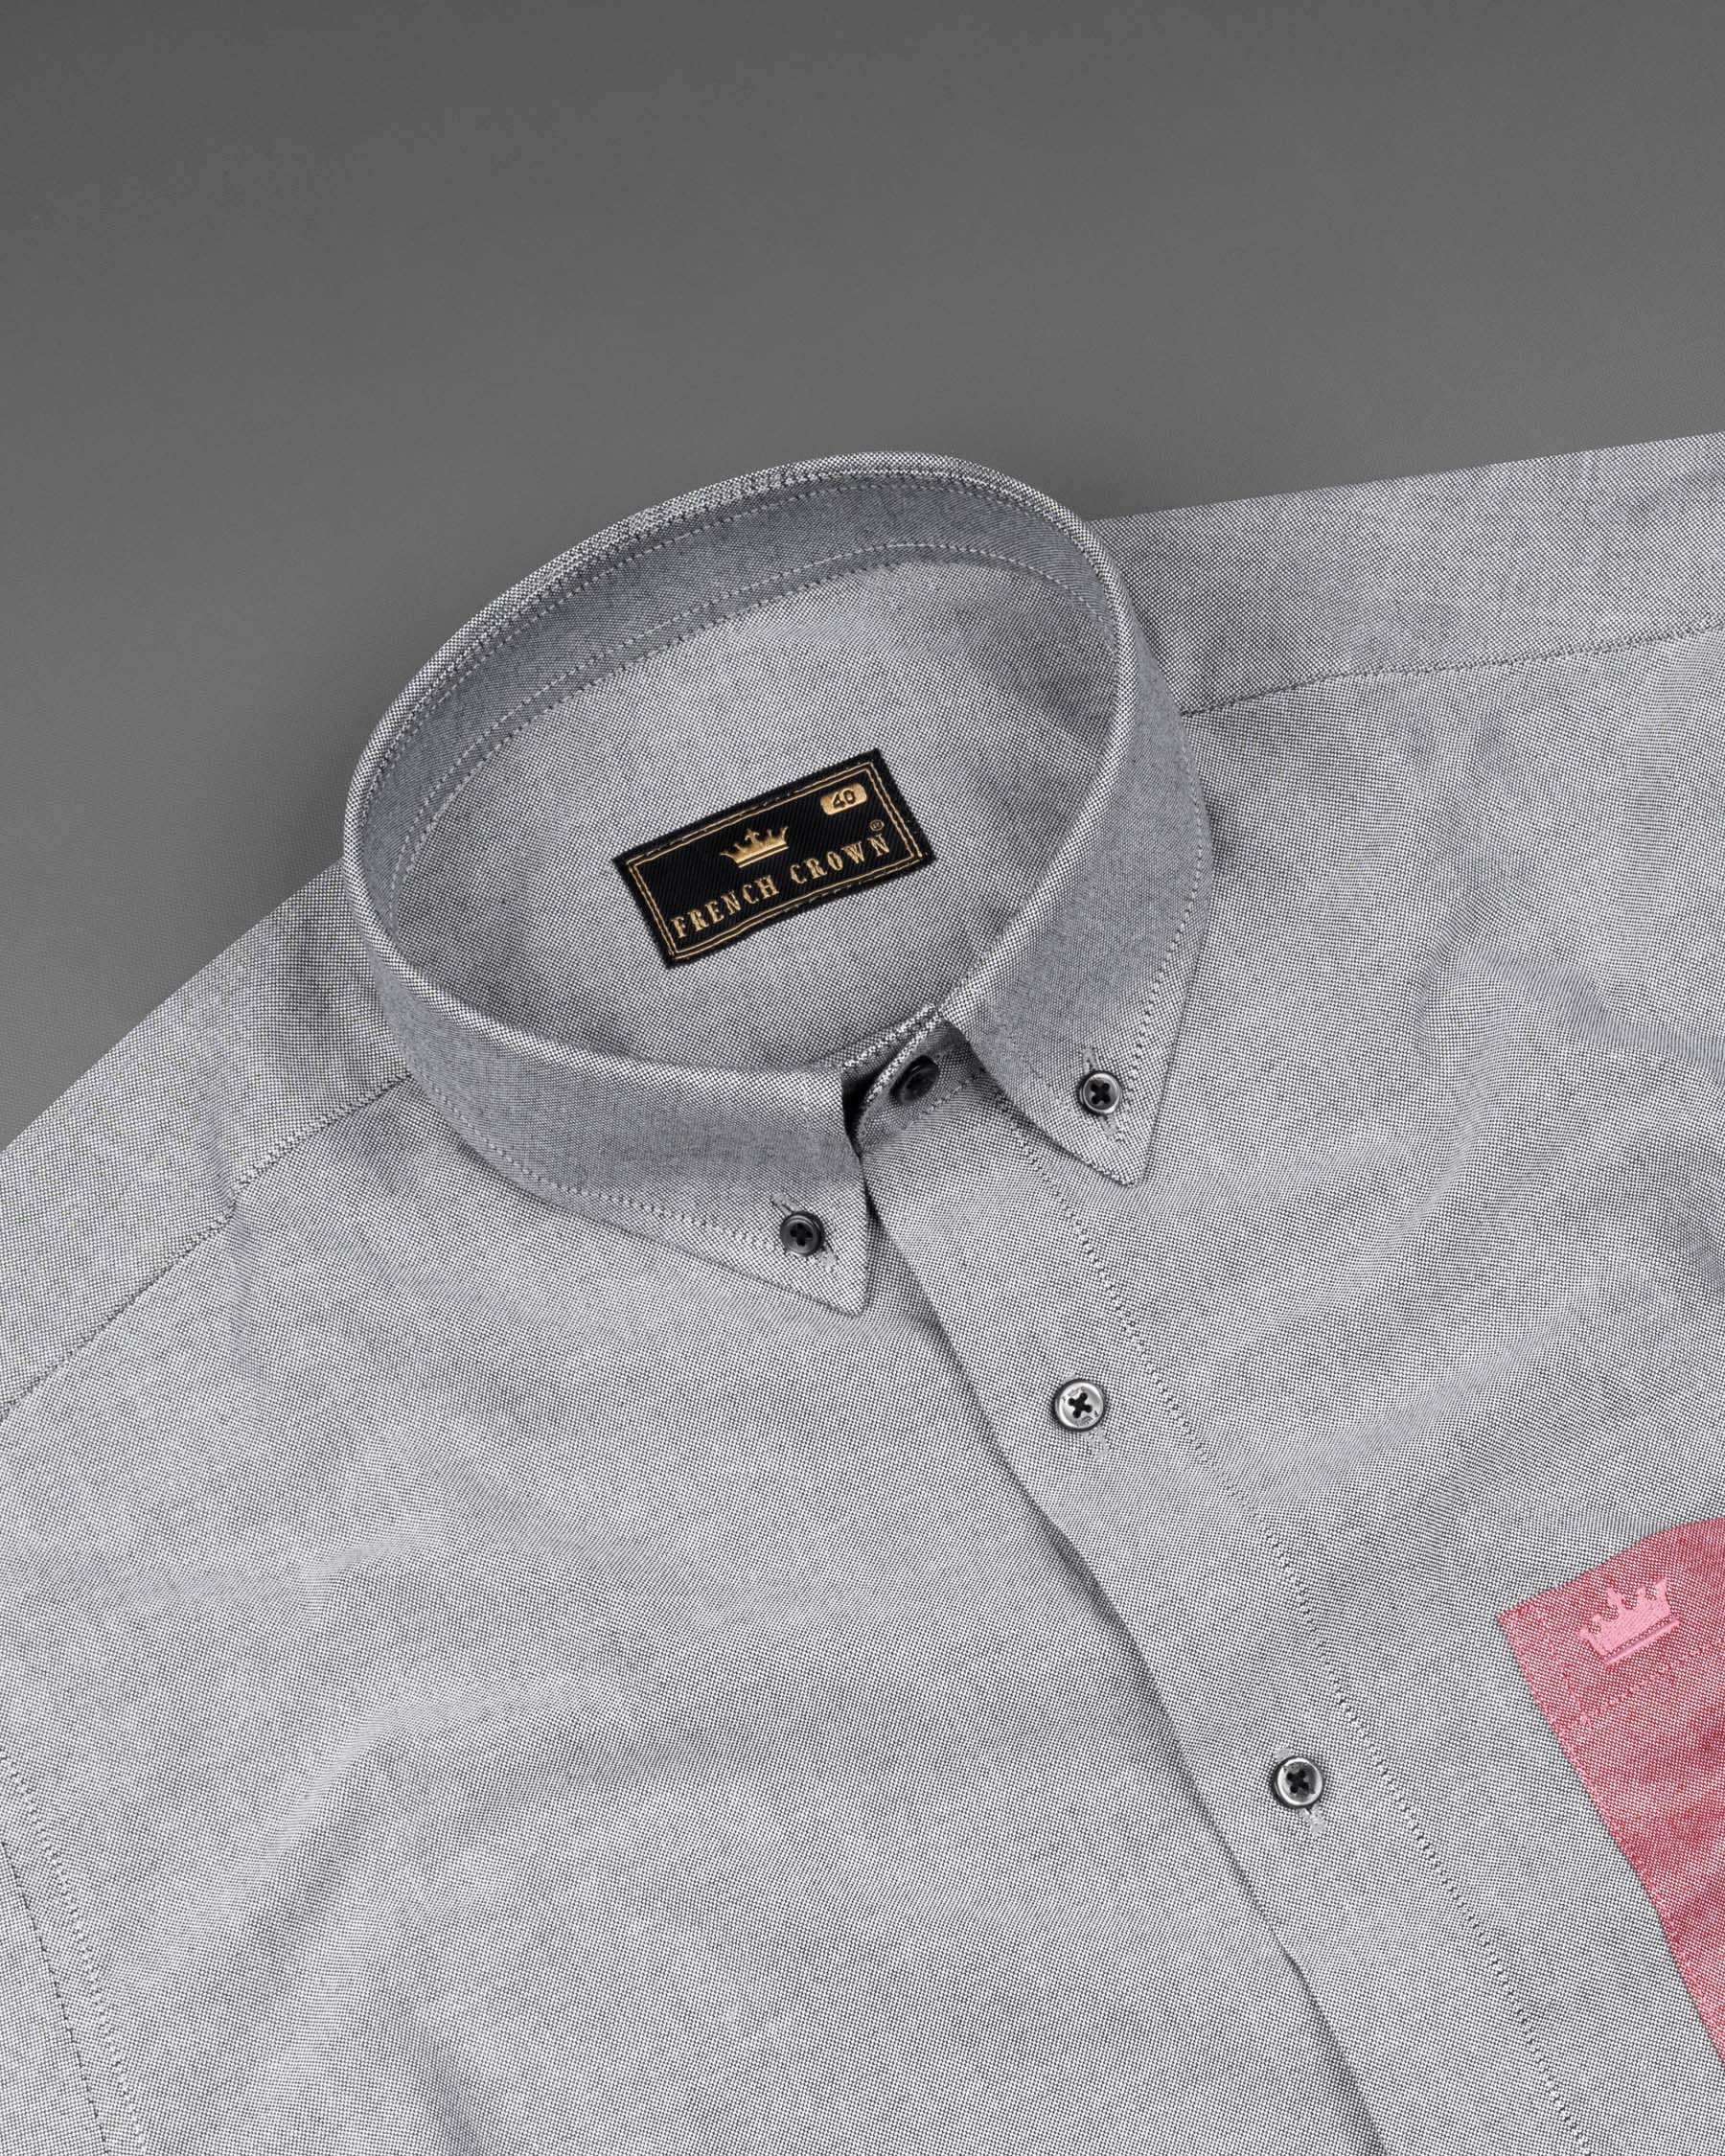 Pumice Gray with Pink Pocket Royal Oxford Shirt 6722-BD-BLK-P310-38,6722-BD-BLK-P310-38,6722-BD-BLK-P310-39,6722-BD-BLK-P310-39,6722-BD-BLK-P310-40,6722-BD-BLK-P310-40,6722-BD-BLK-P310-42,6722-BD-BLK-P310-42,6722-BD-BLK-P310-44,6722-BD-BLK-P310-44,6722-BD-BLK-P310-46,6722-BD-BLK-P310-46,6722-BD-BLK-P310-48,6722-BD-BLK-P310-48,6722-BD-BLK-P310-50,6722-BD-BLK-P310-50,6722-BD-BLK-P310-52,6722-BD-BLK-P310-52